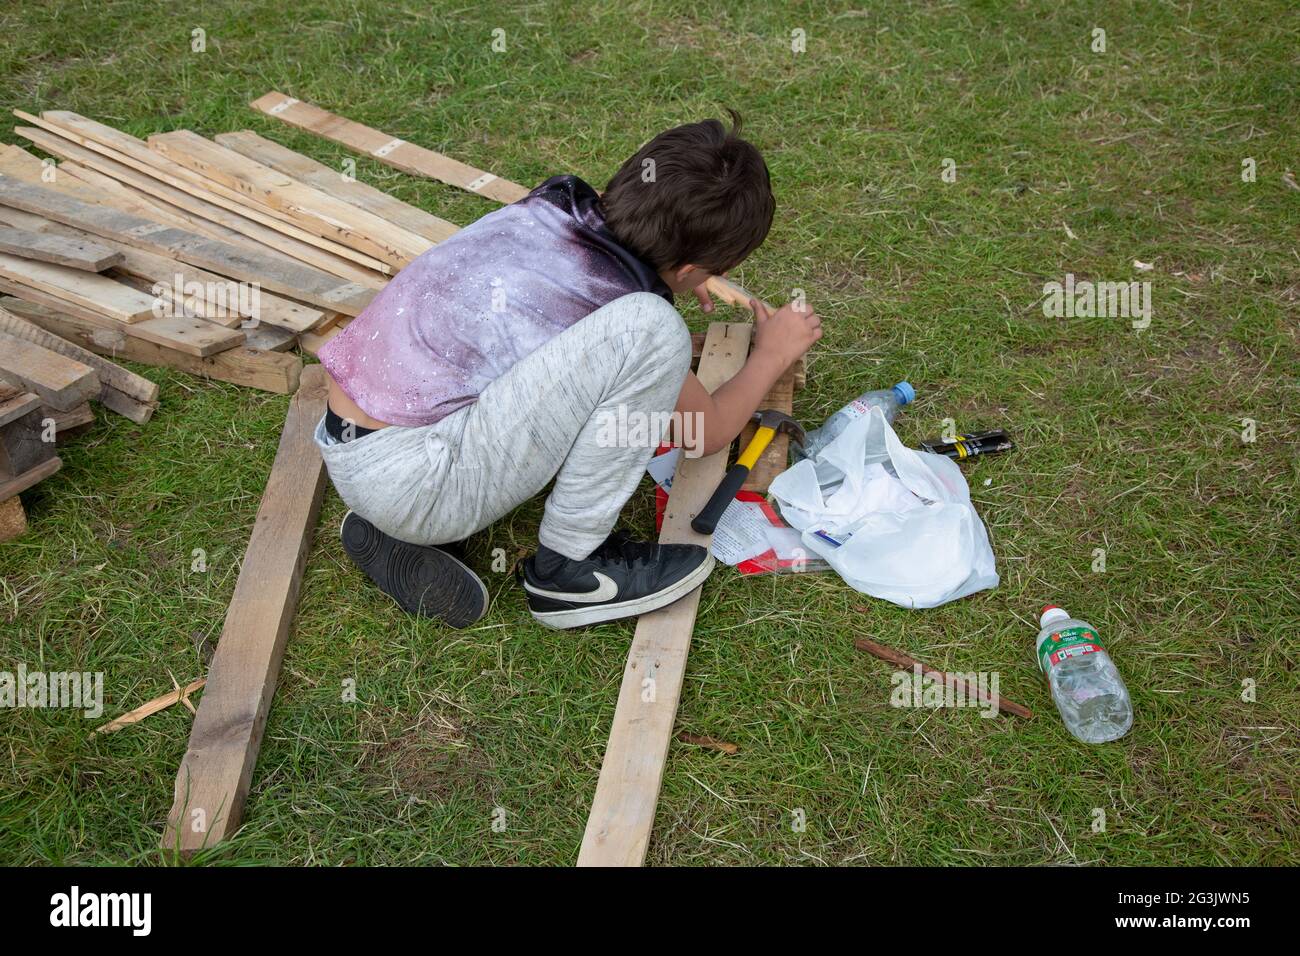 A boy building something on a Freedom protester camp on Shepherd's Bush Green, London, UK. June 2021 Stock Photo